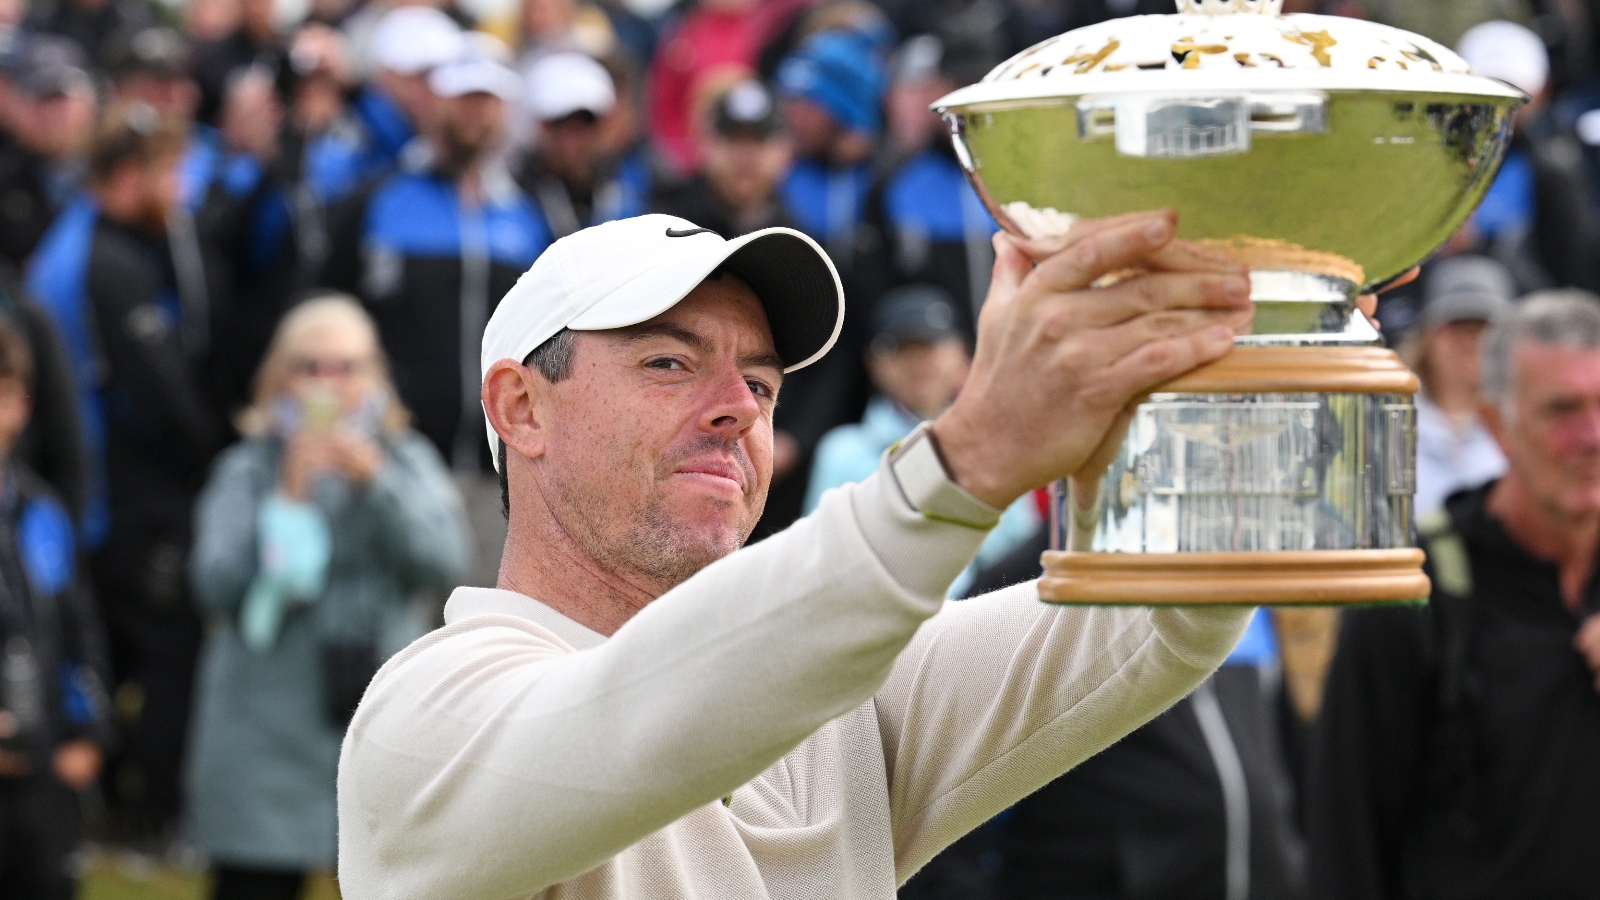 Rory McIlroy Quips About His Winnings At Scottish Open